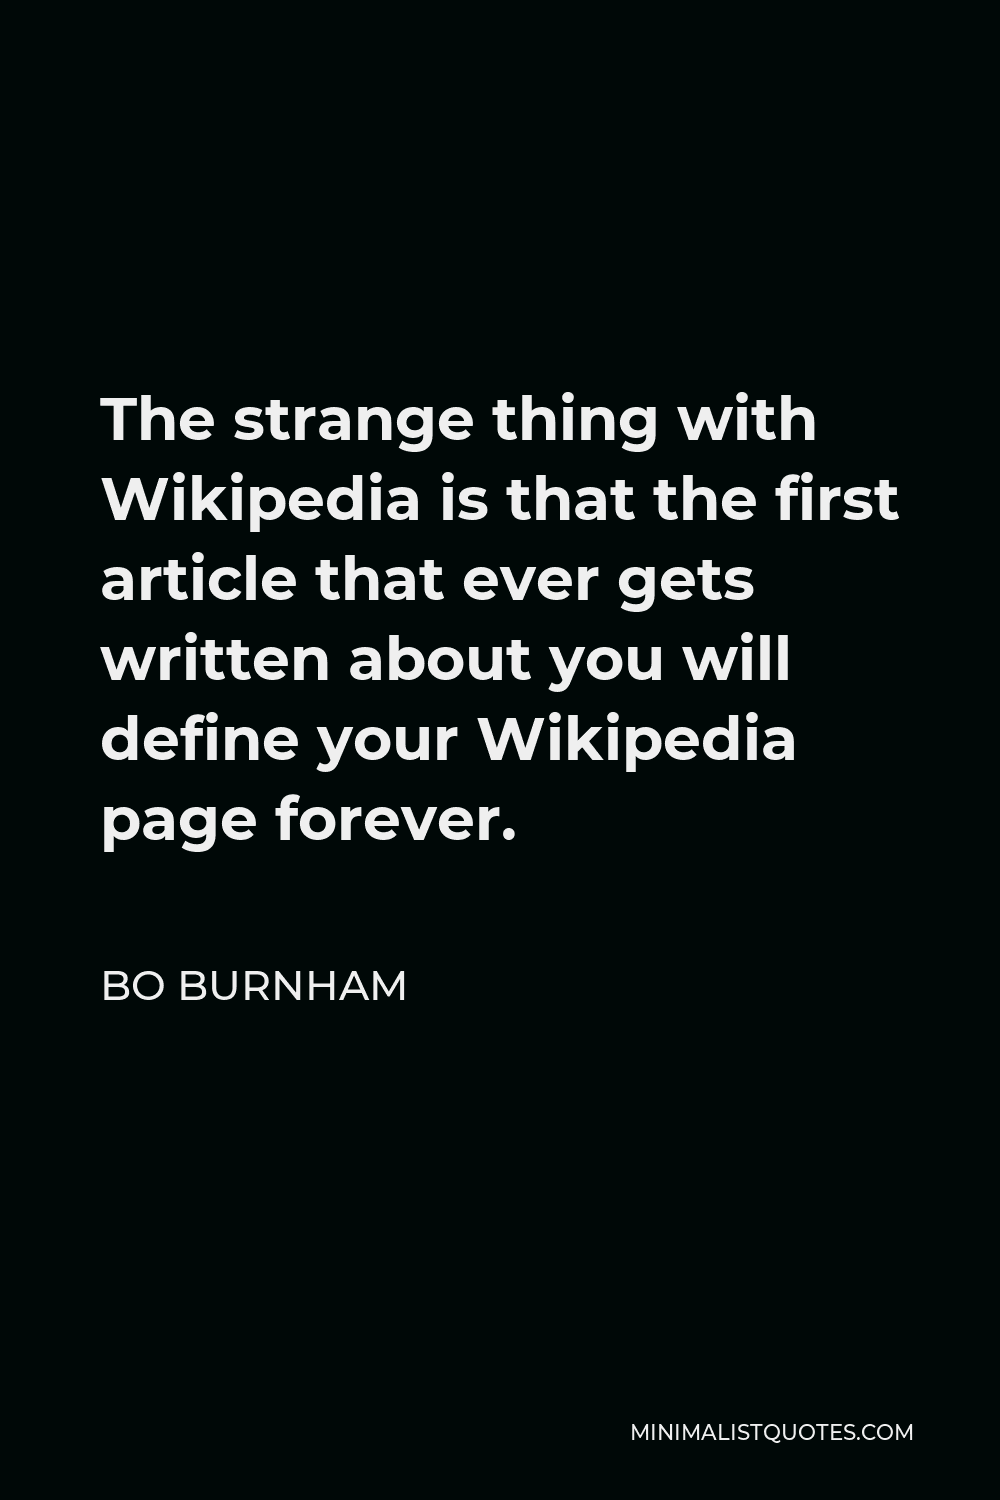 Bo Burnham Quote - The strange thing with Wikipedia is that the first article that ever gets written about you will define your Wikipedia page forever.